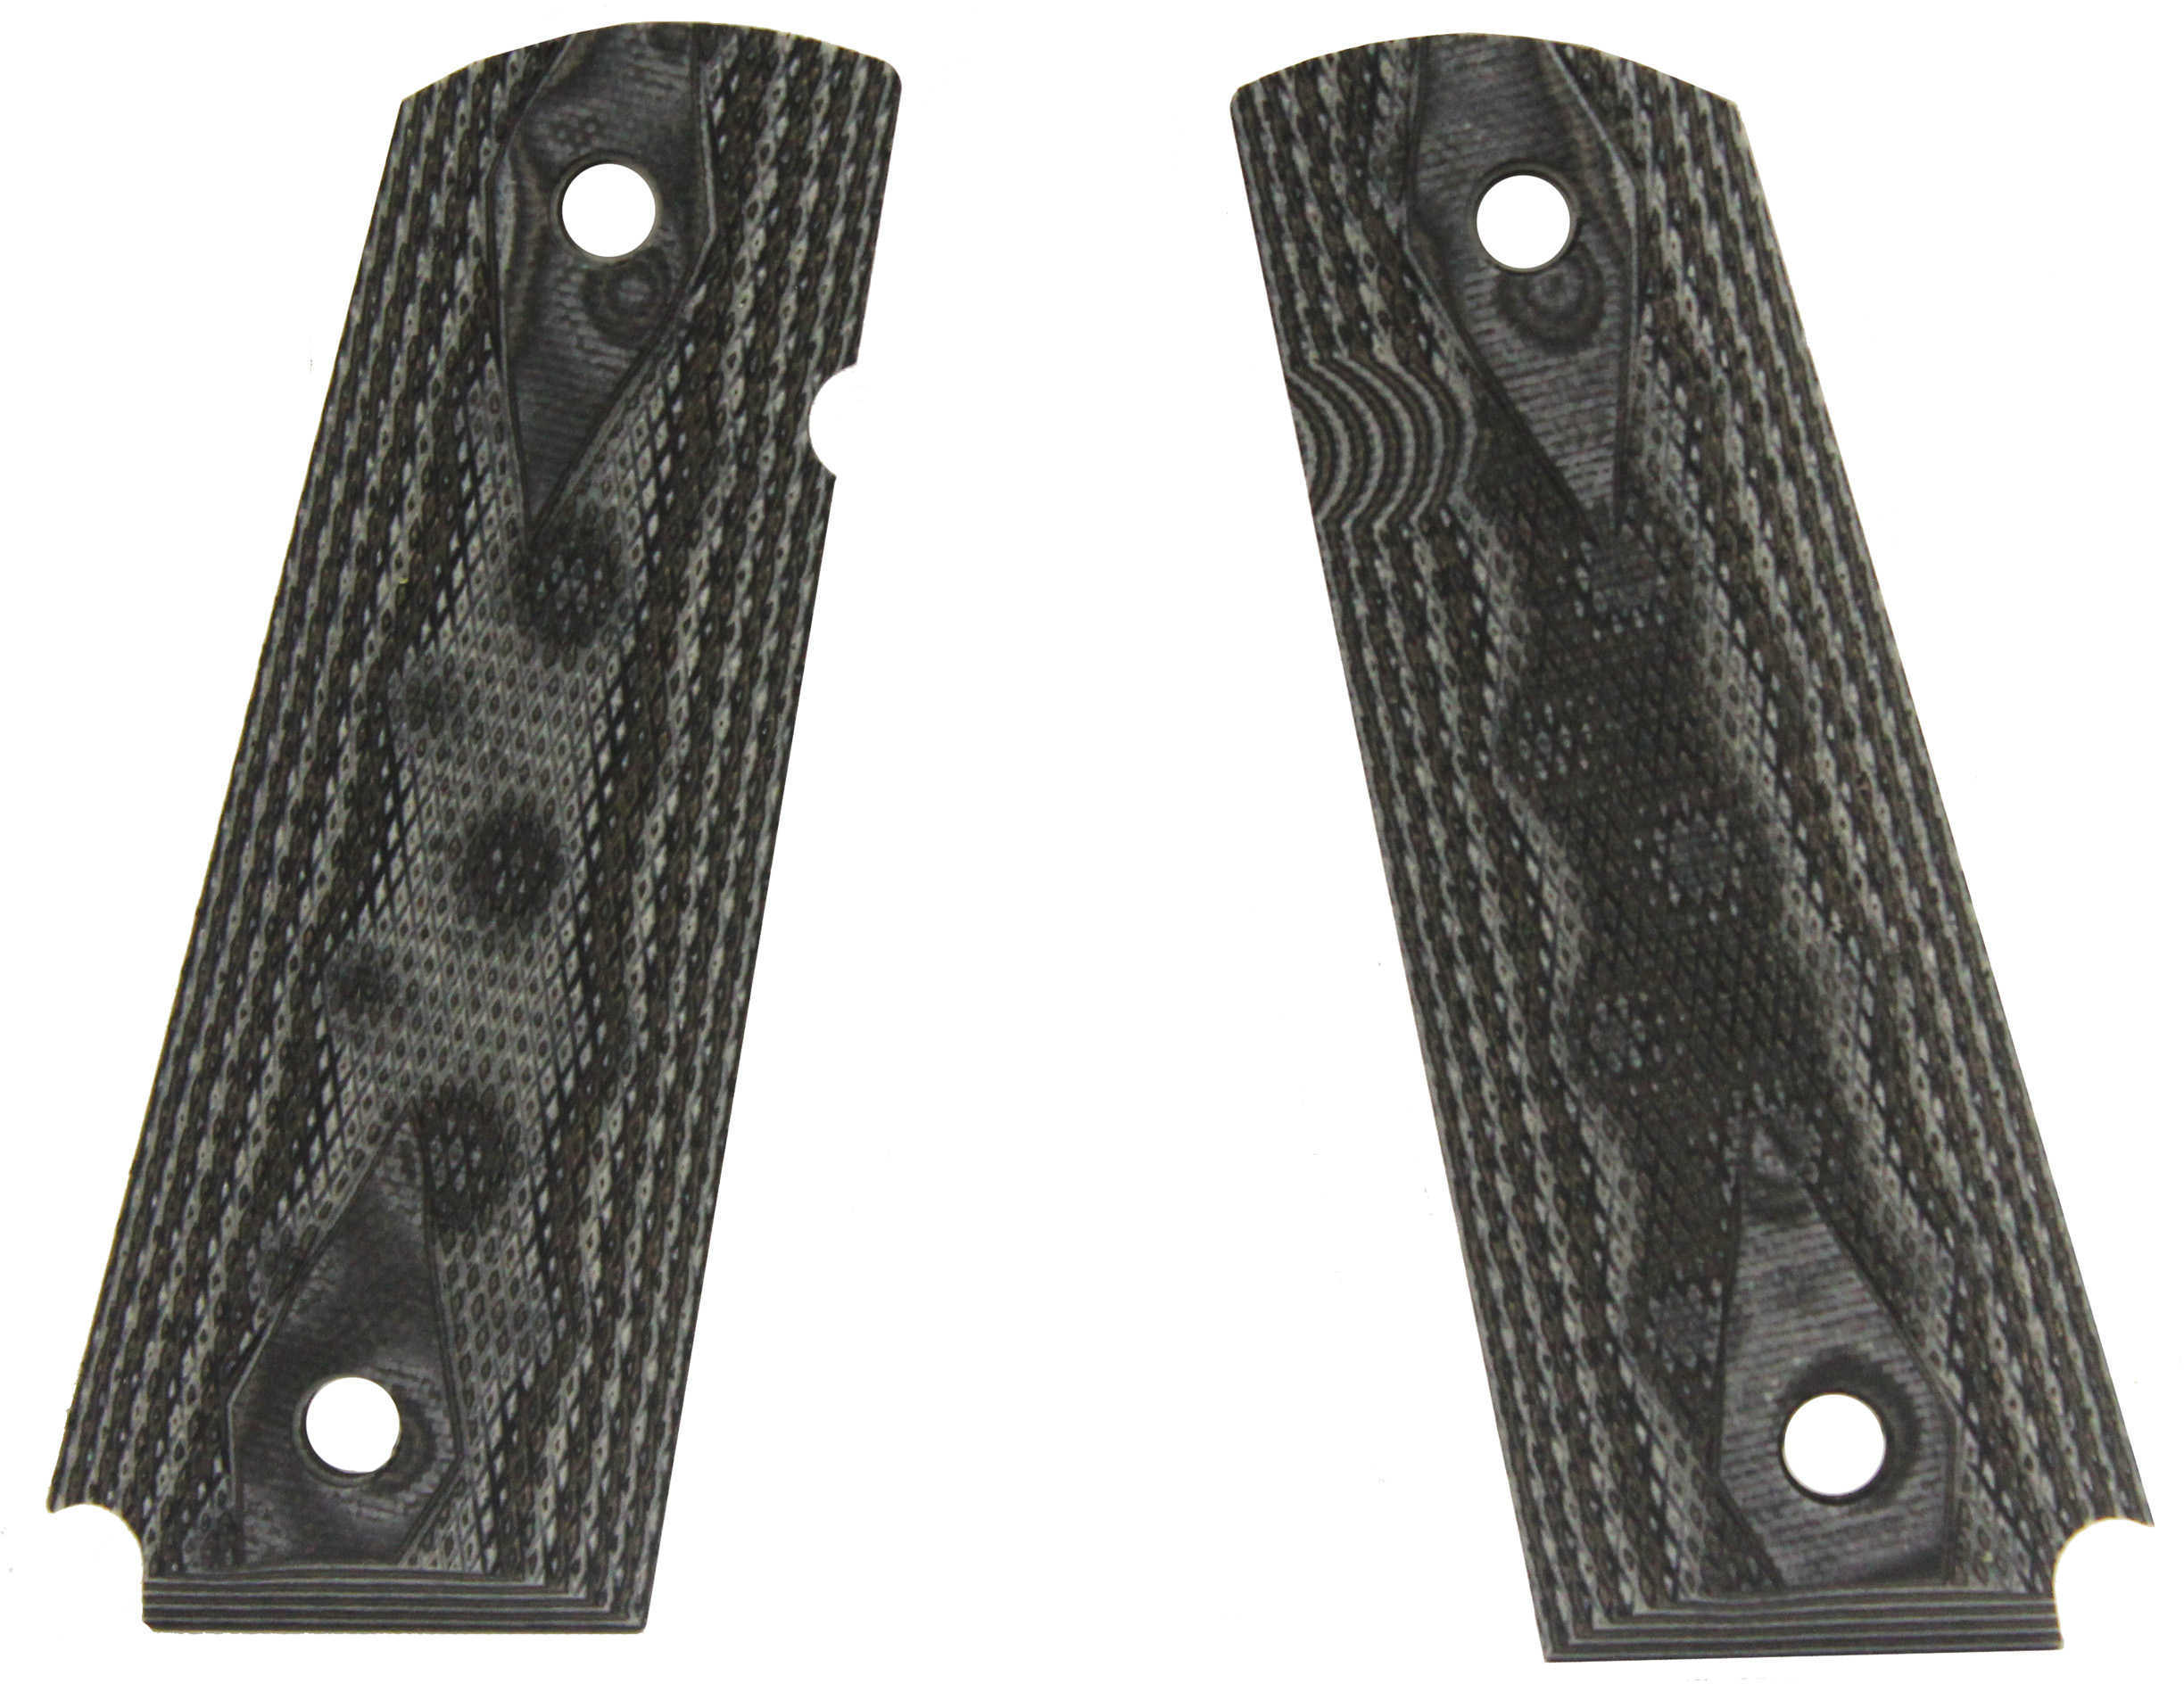 Hogue Colt & 1911 Government Grips Checkered G-10 G-Mascus Black/Grey 45177-BLKGRY